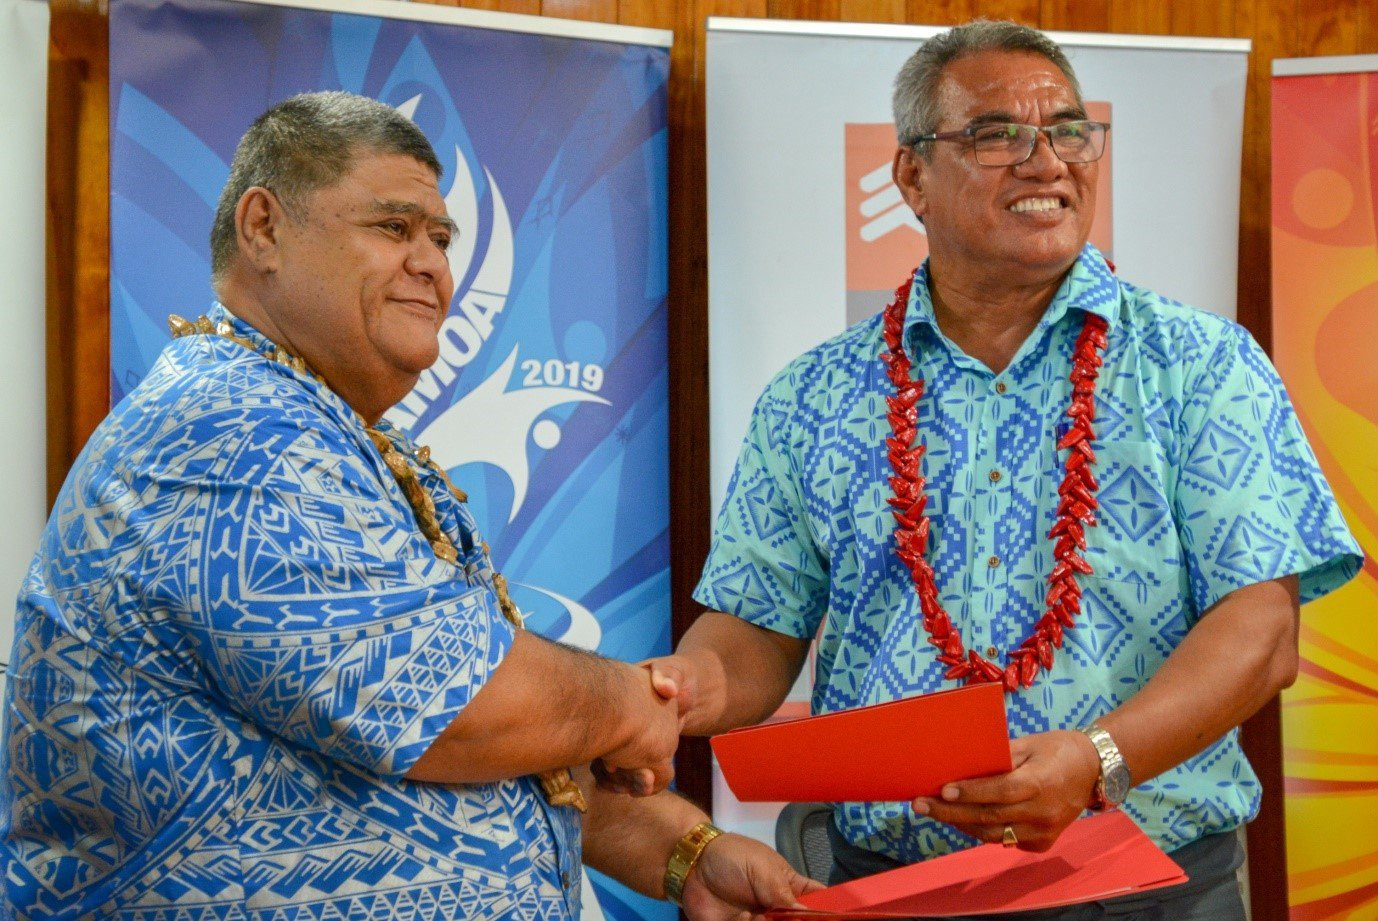 Preparations are well underway in Apia for the Samoa 2019 Games - with Samoa Shipping Company already on board as a major sponsor ©Samoa2019